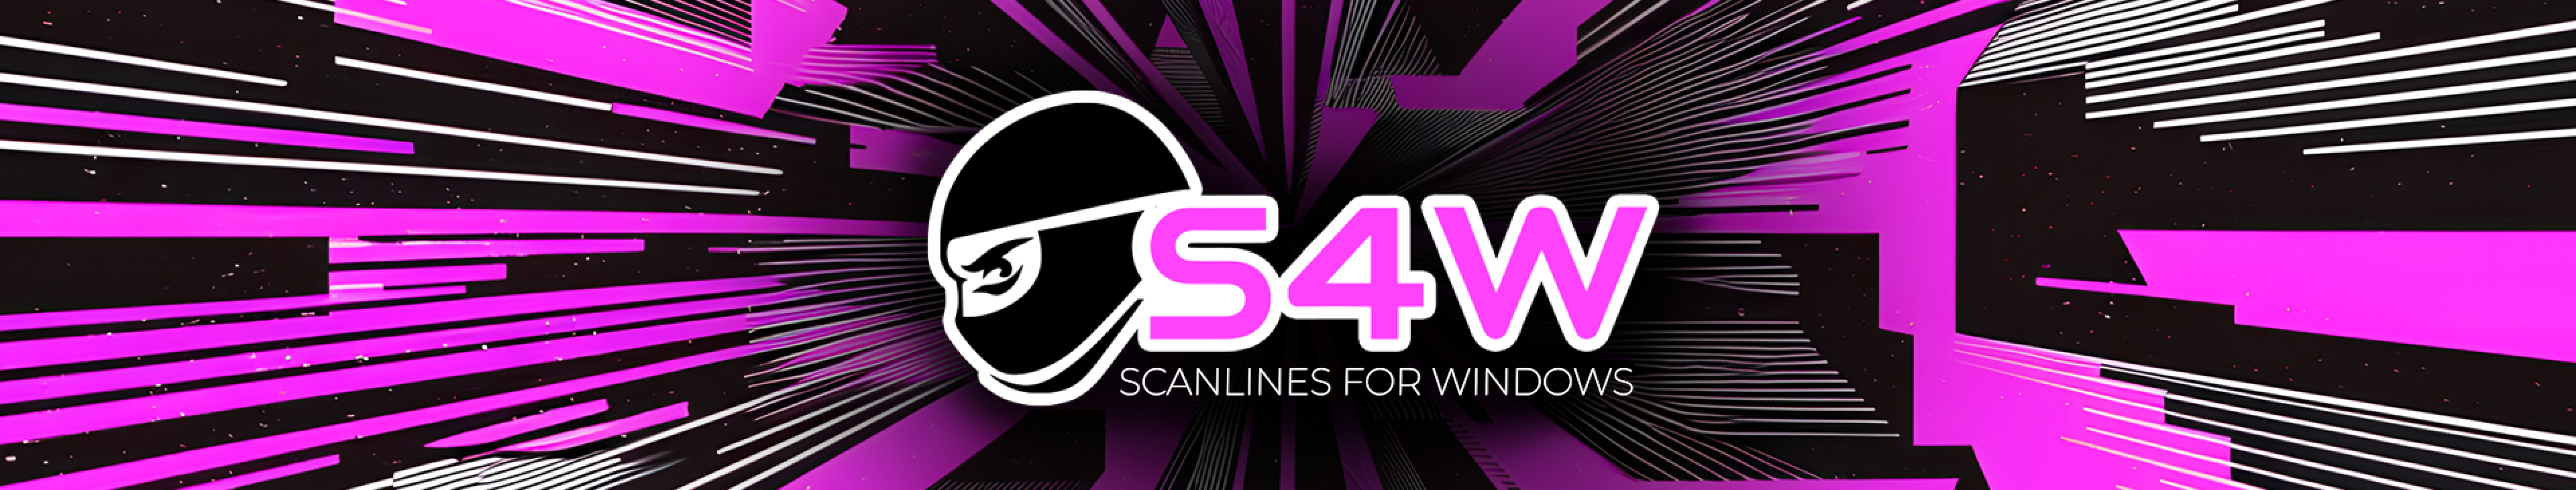 Scanlines for Windows